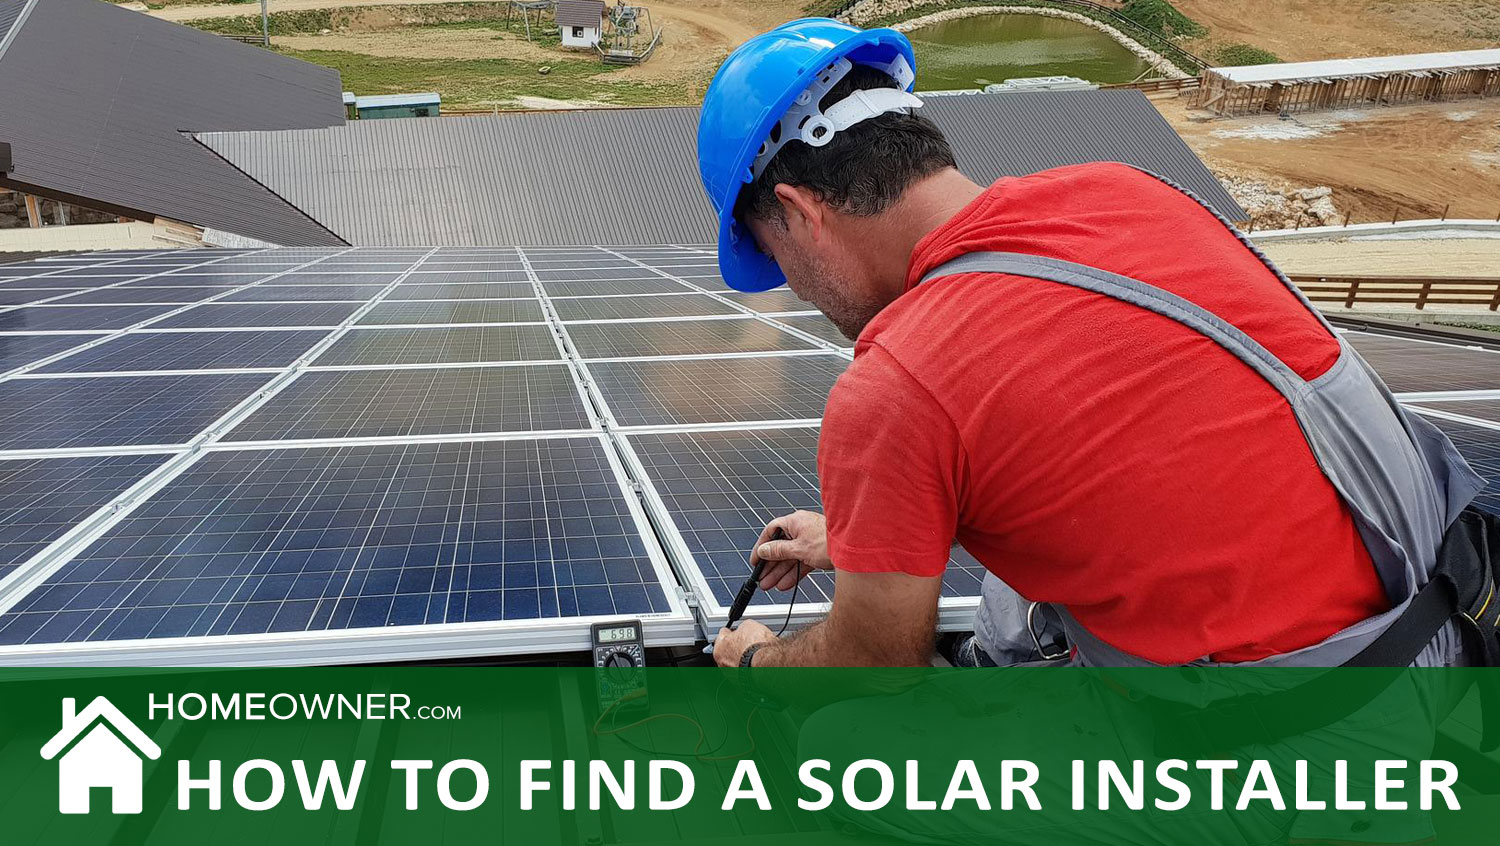 How To Find a Solar Installer